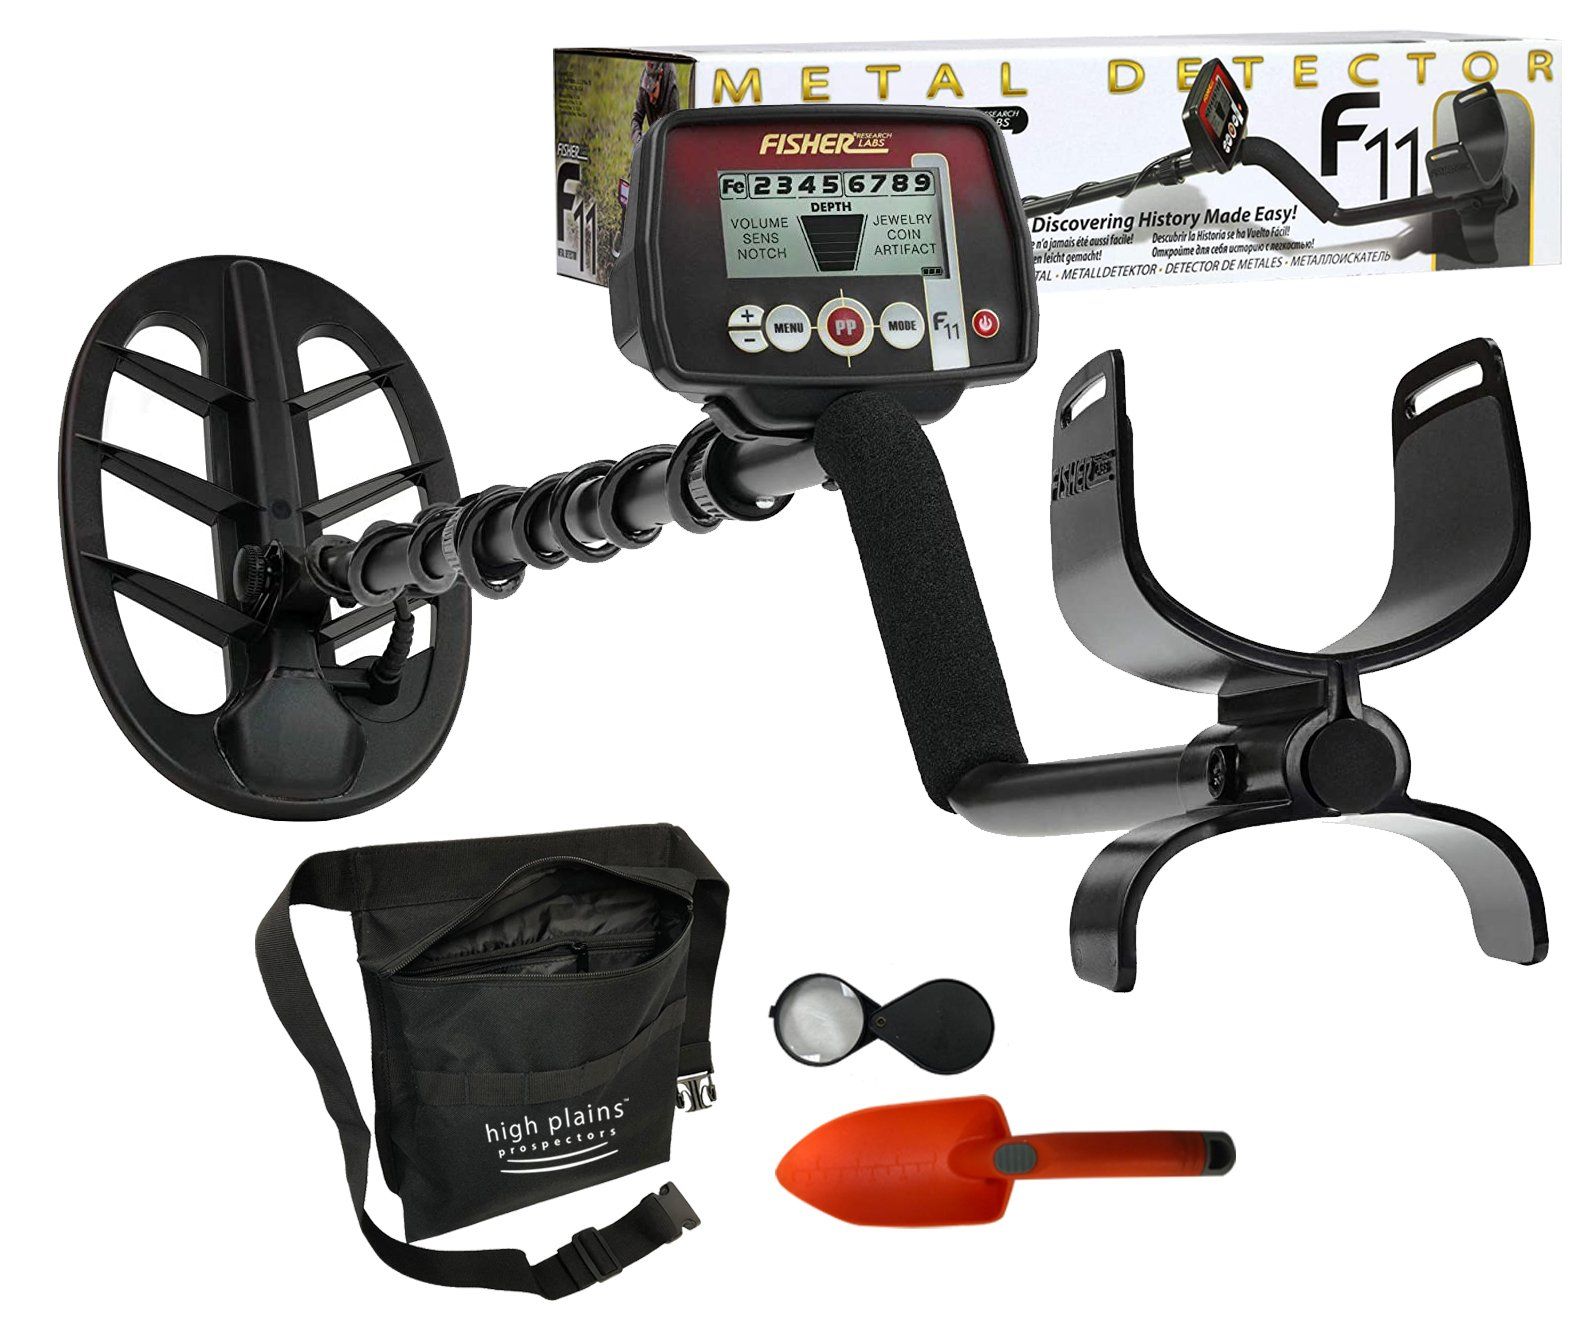 Fisher F11 Metal Detector with 11" DD Coil with Free Gear